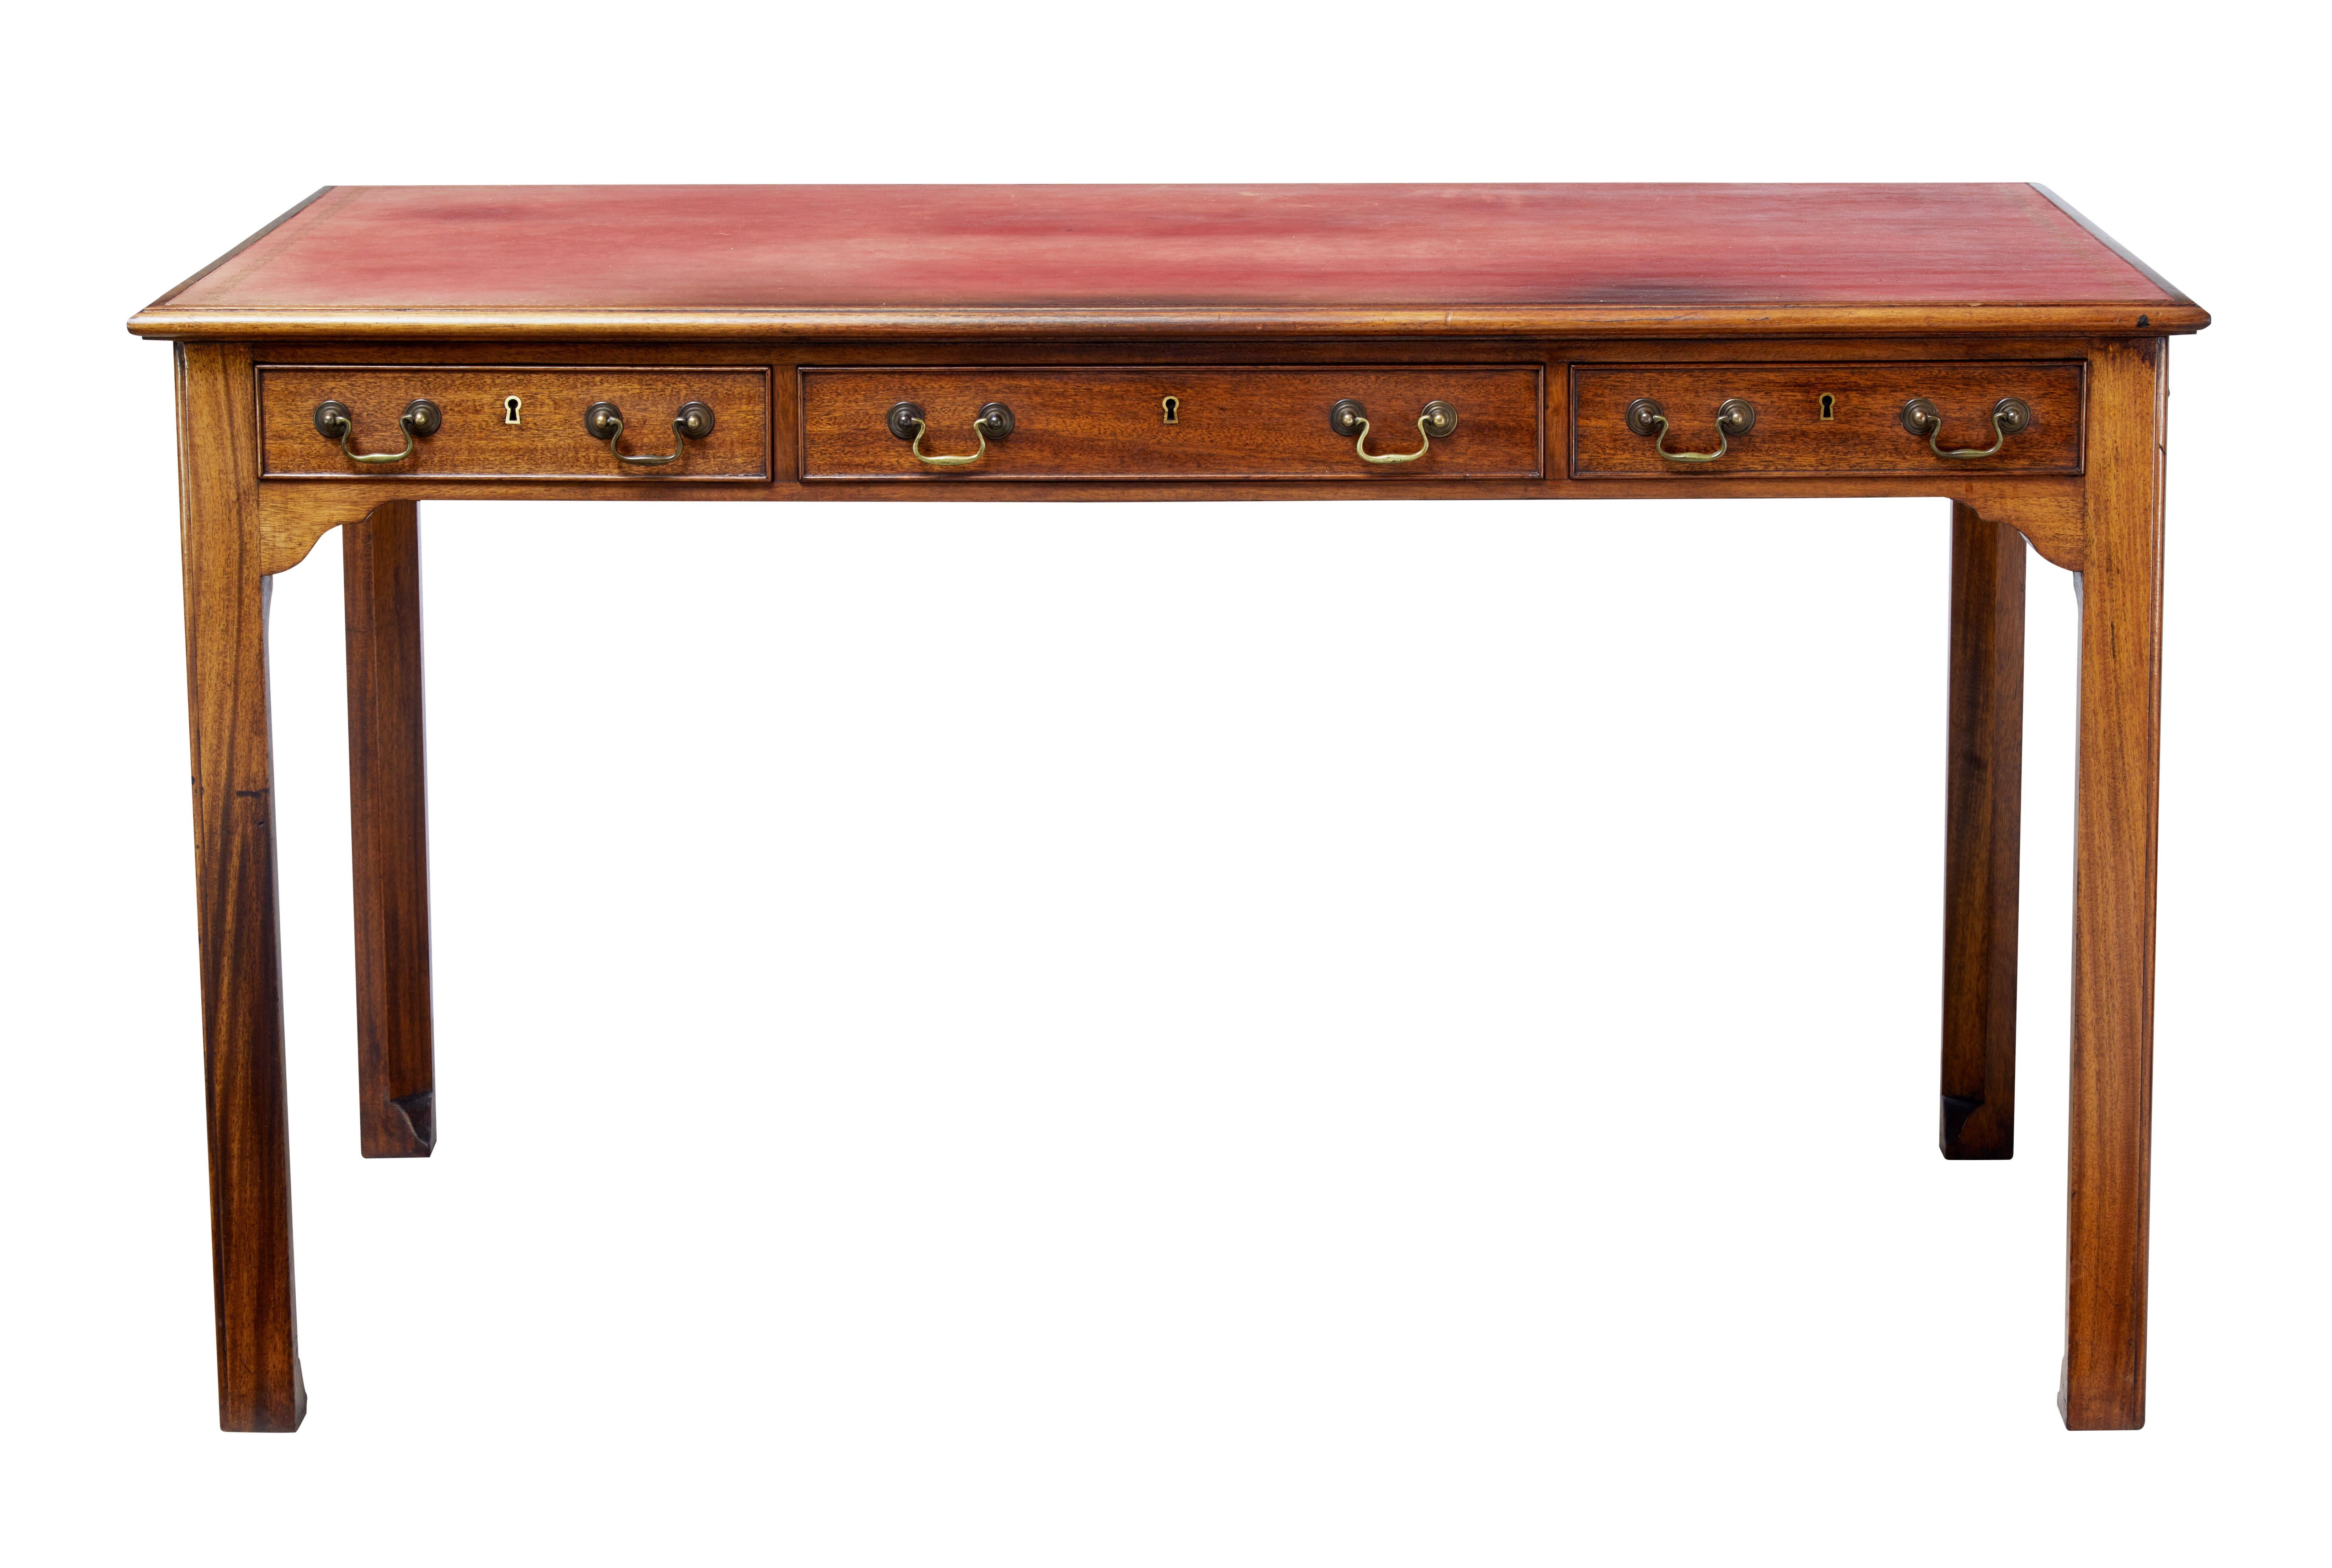 Late George III English writing table with leather top.

Desk front with three drawers below the writing surface and original brass swan neck handles. Dummy to reverse with further handles to the sides.

Possibly the original red leather writing